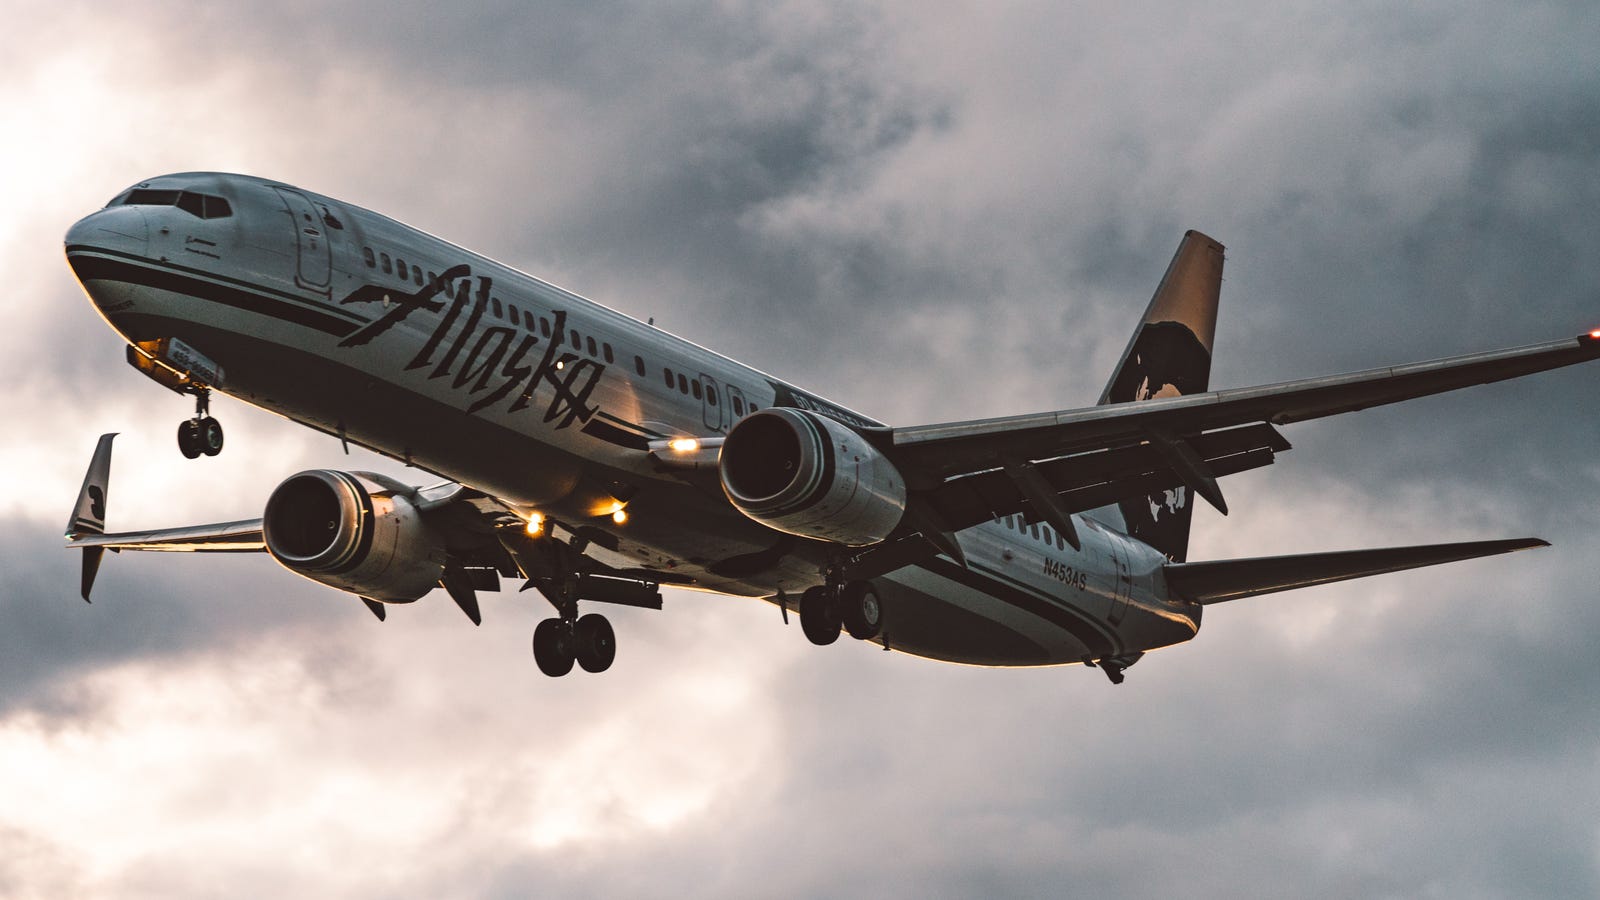 Take An Impromptu Trip With Alaska Airlines' Year-End